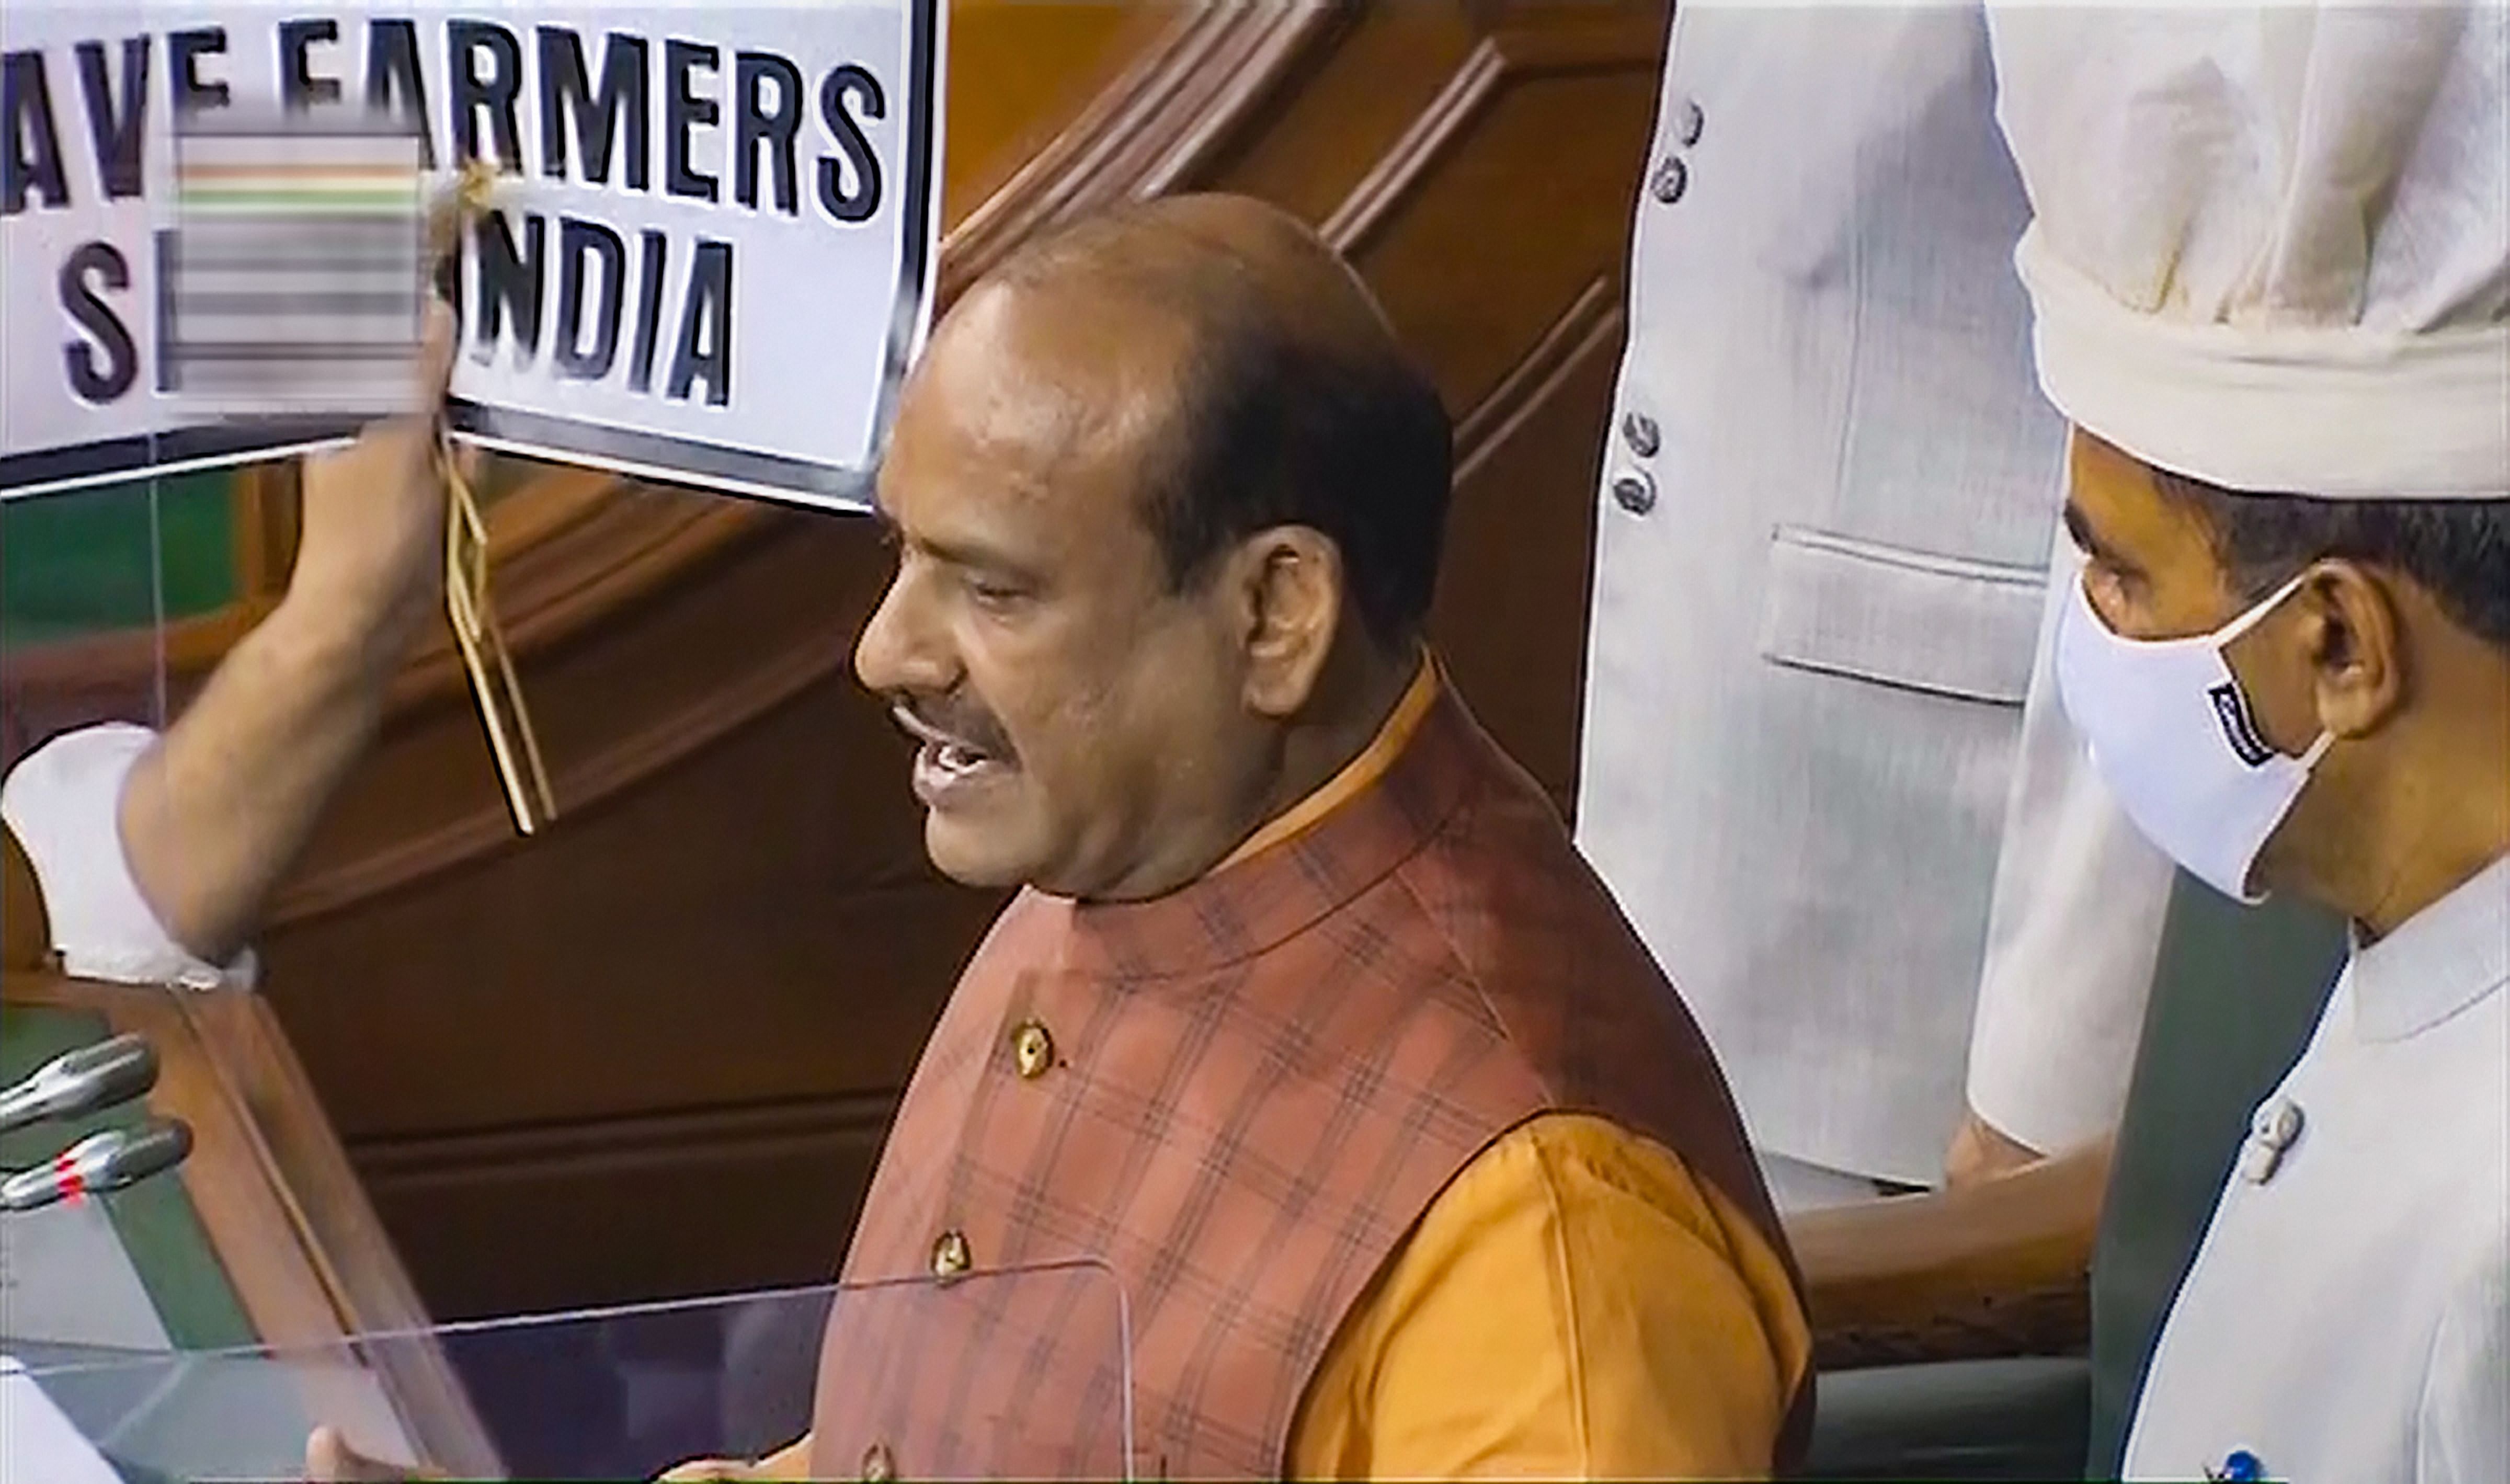  Lok Sabha Speaker Om Birla conducts proceedings as opposition members display placards to protest over farmers' issues, during the Monsoon Session of Parliament, in New Delhi. Credit: PTI Photo